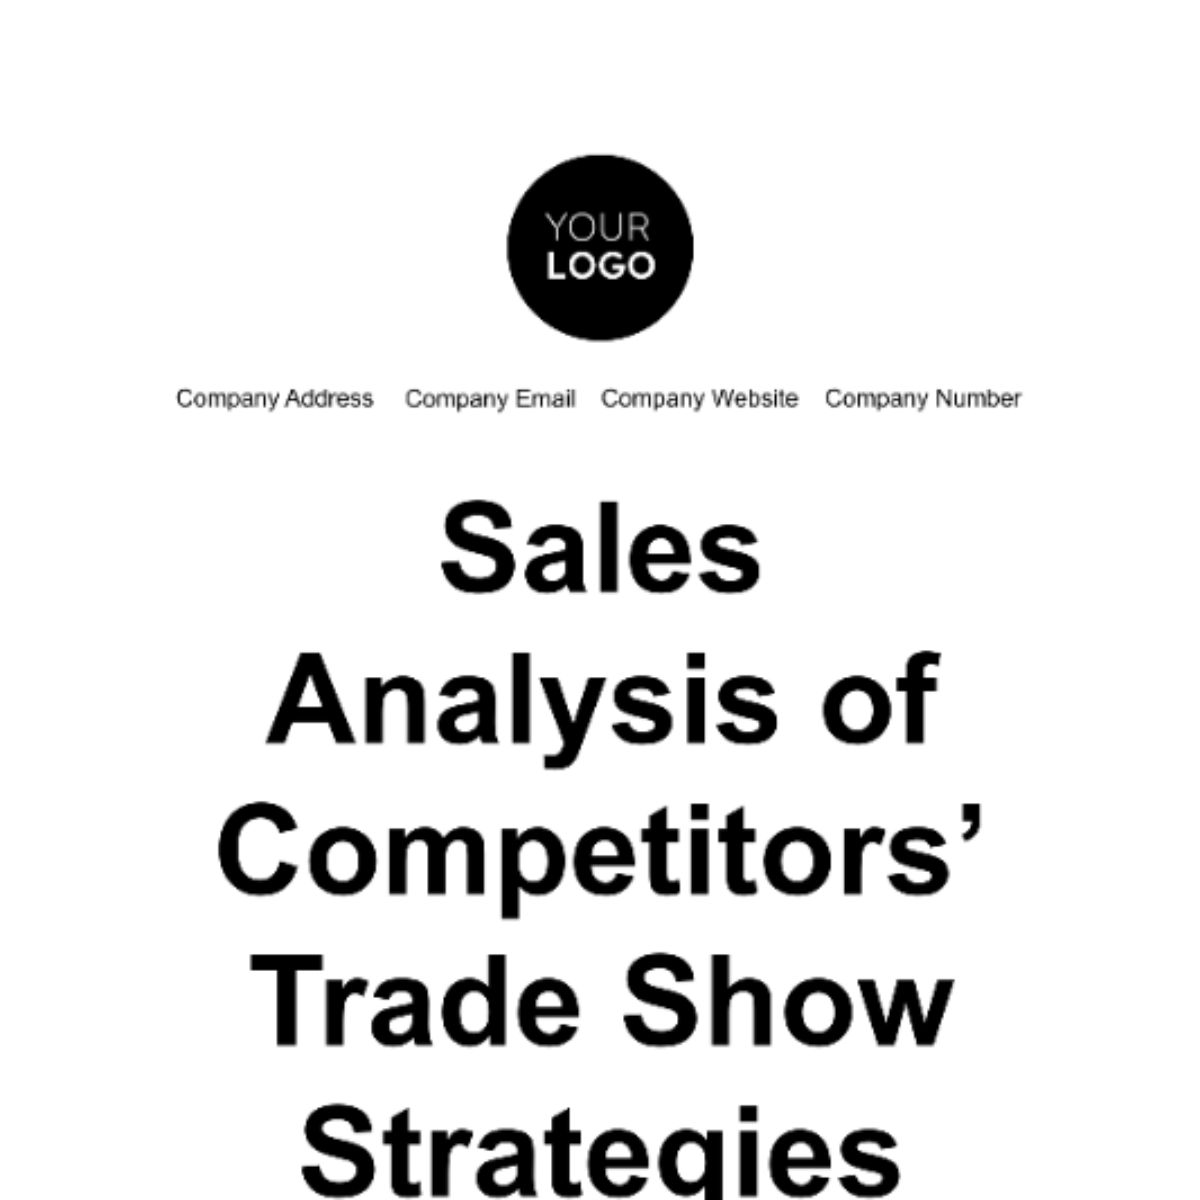 Free Sales Analysis of Competitors’ Trade Show Strategies Template